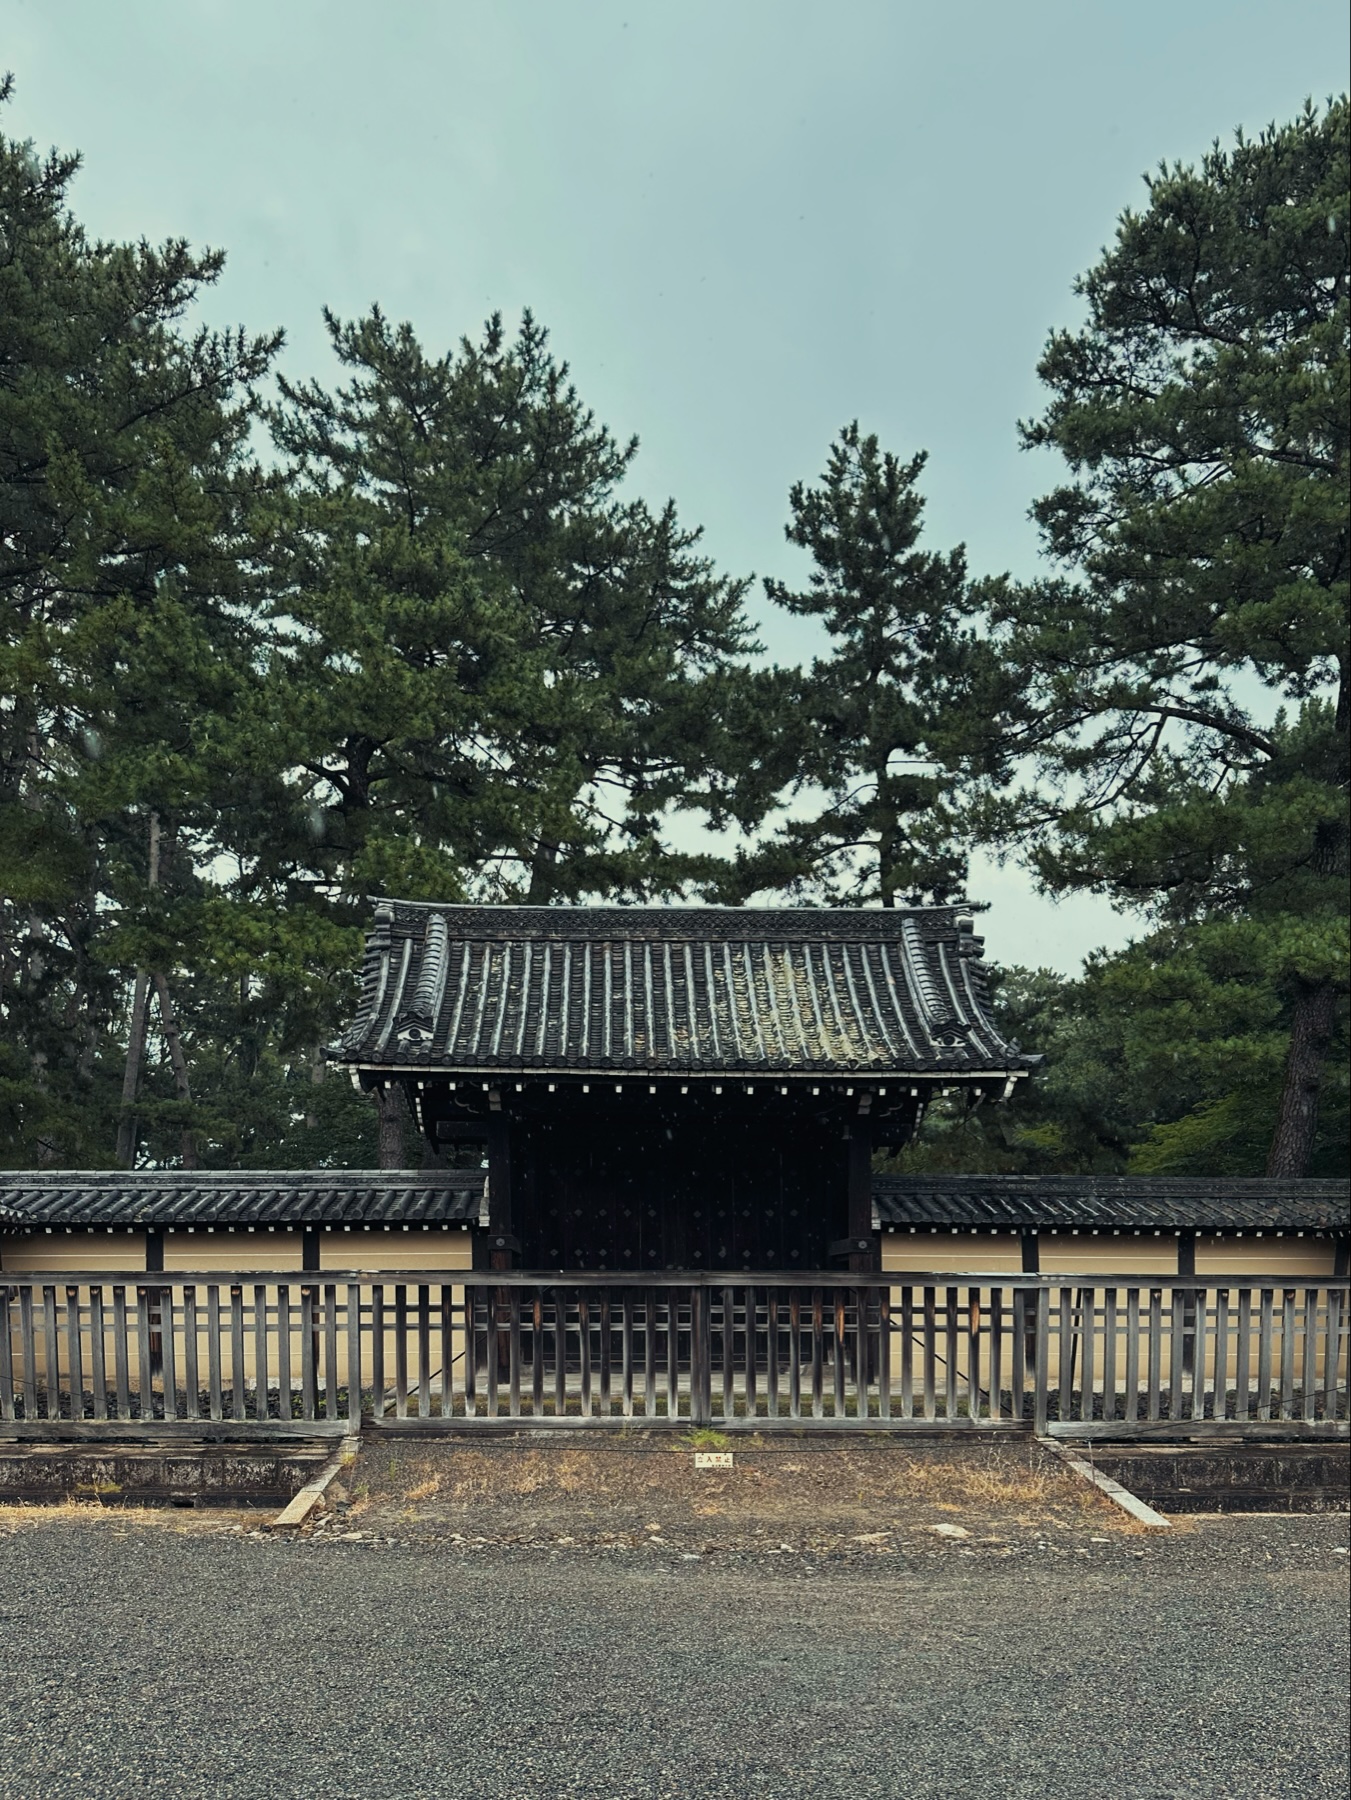 An old Japanese entrance gate at the imperial palace